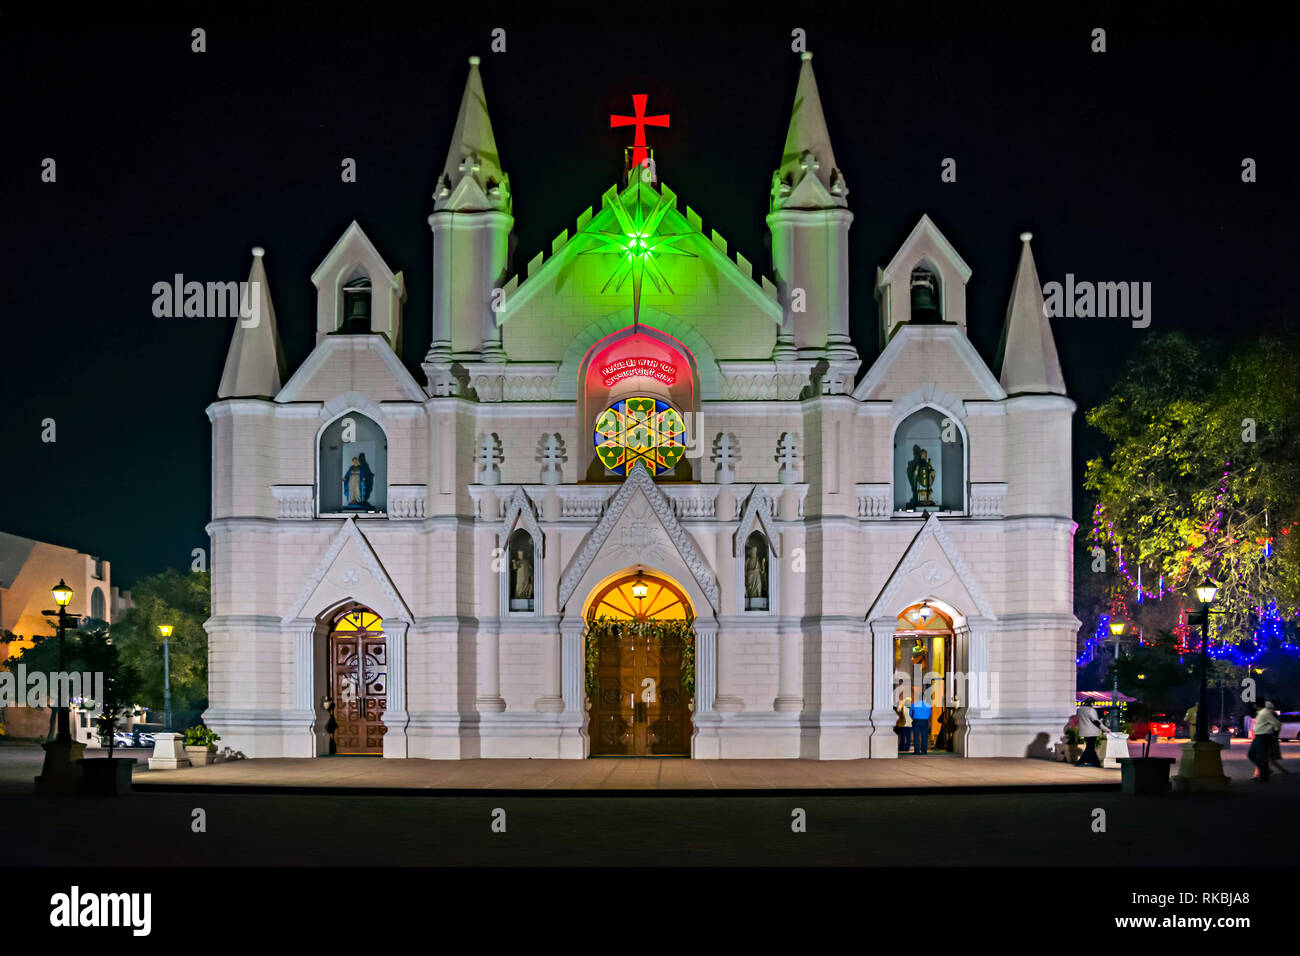 160 years old magnificent structure and an iconic landmark in Pune city - Saint Patrick’s Cathedral. Stock Photo